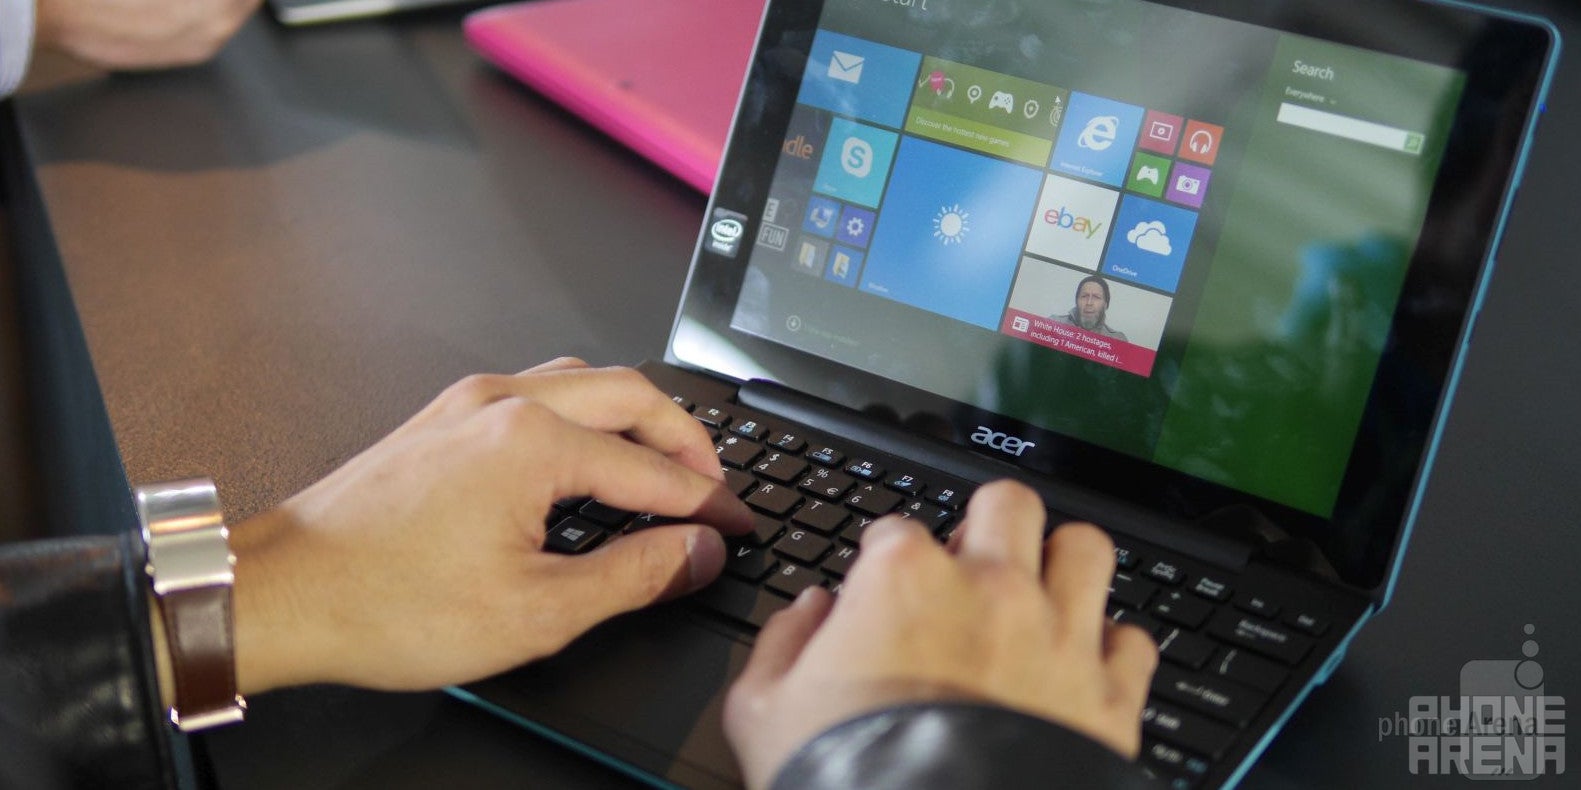 Acer Aspire Switch 10 E hands-on